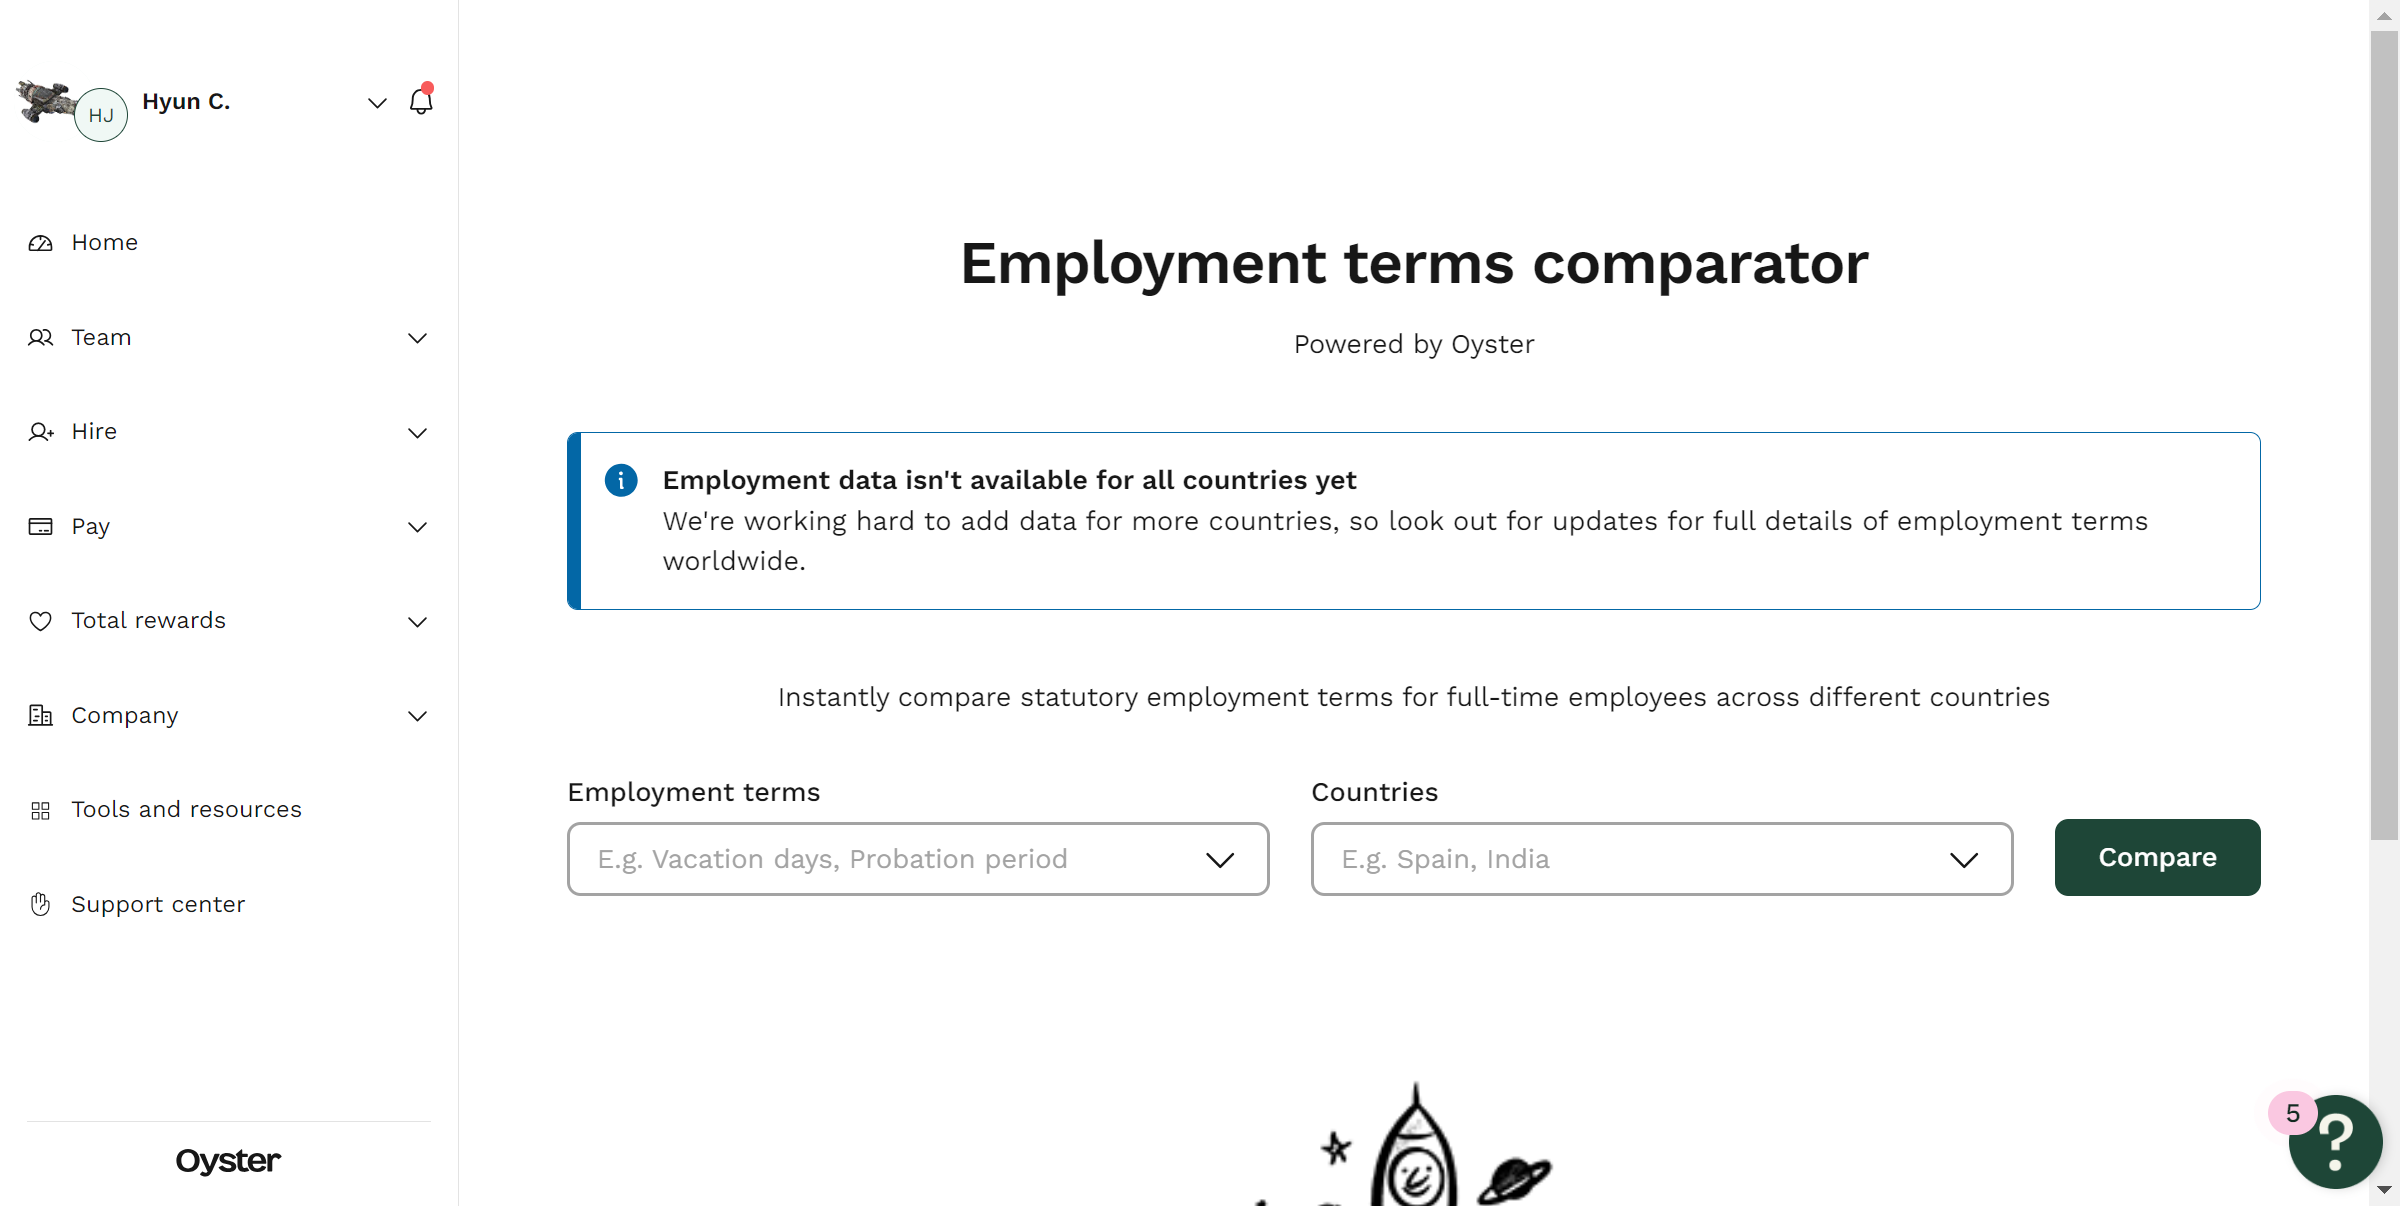 Use our employment terms comparator to discover the statutory terms for full-time employees in the countries you want to hire from. 

Step 1 of 3